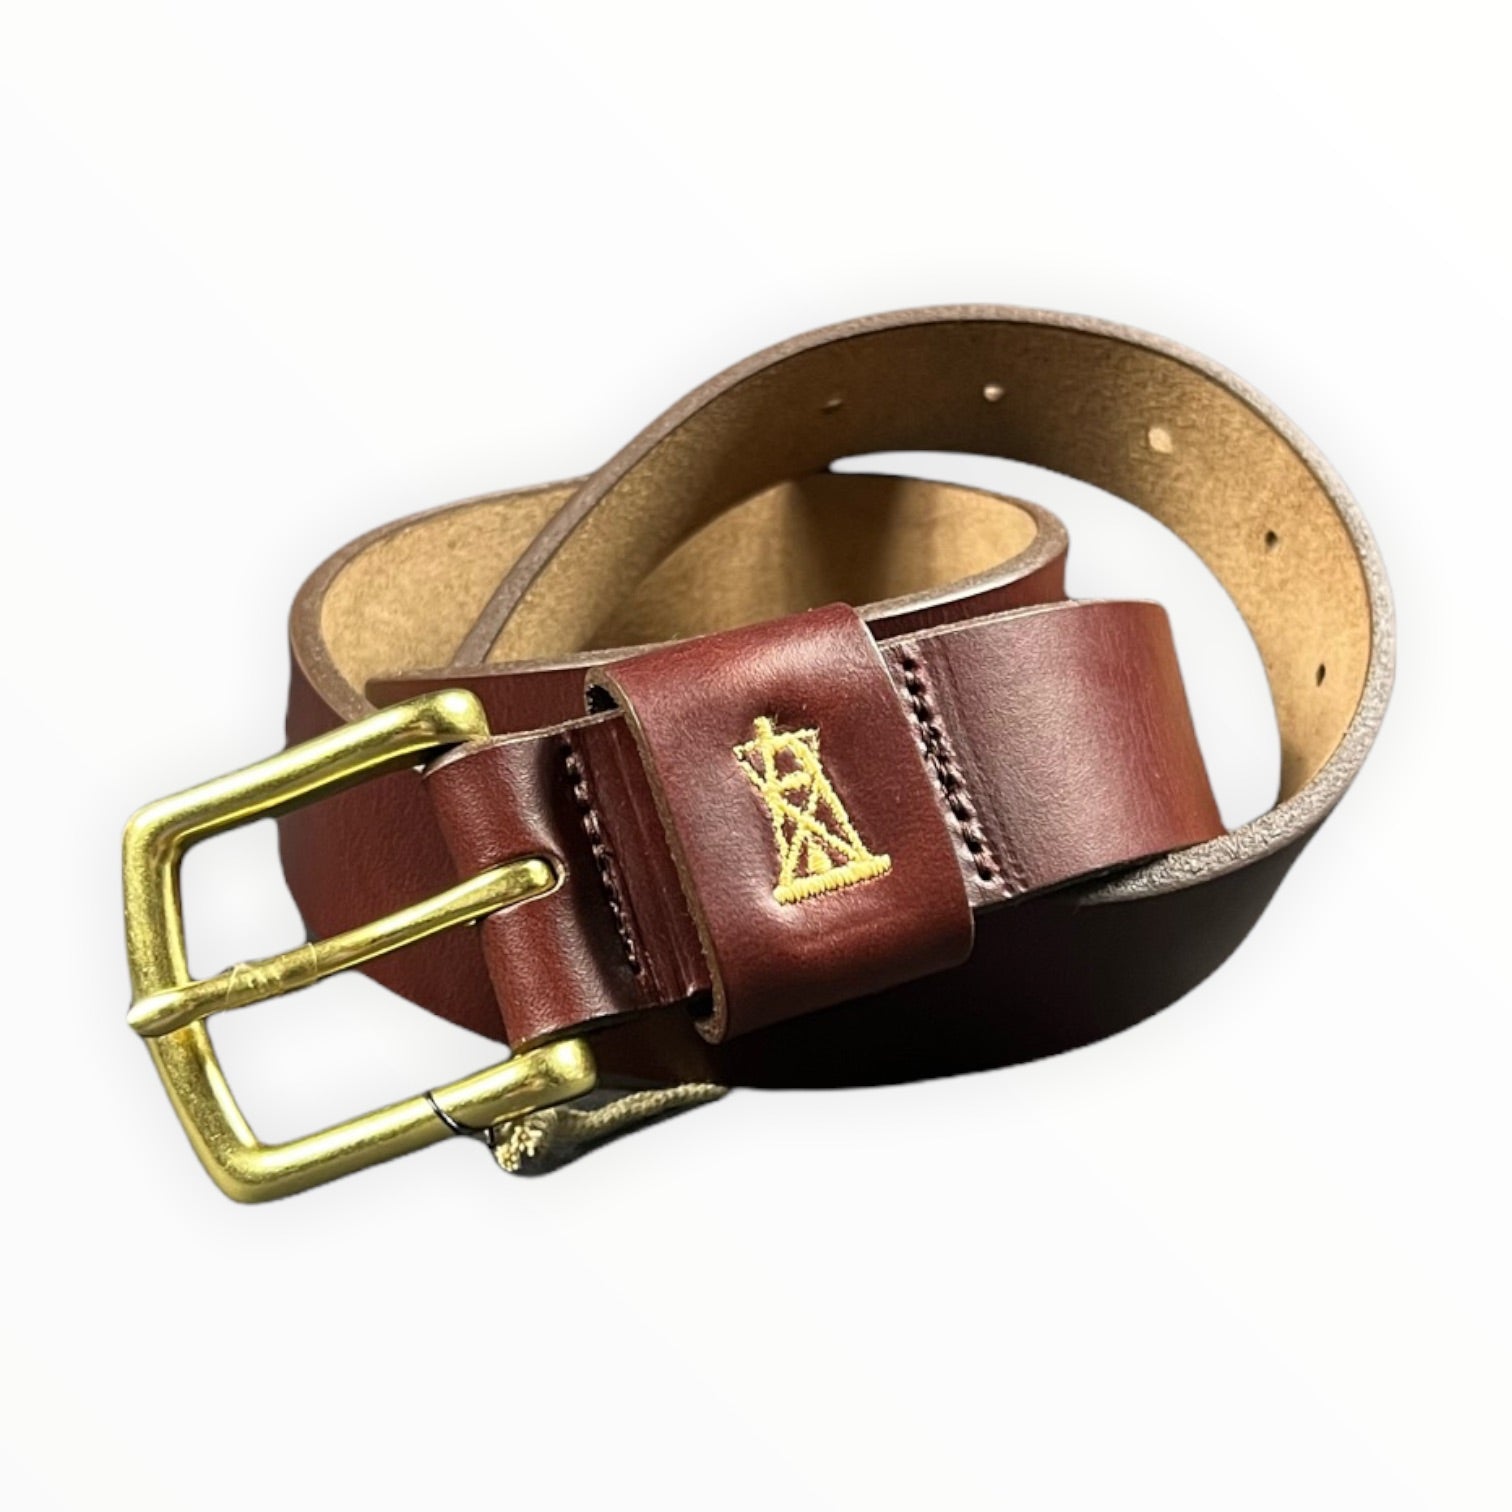 Leather Belt - Brown Pull up